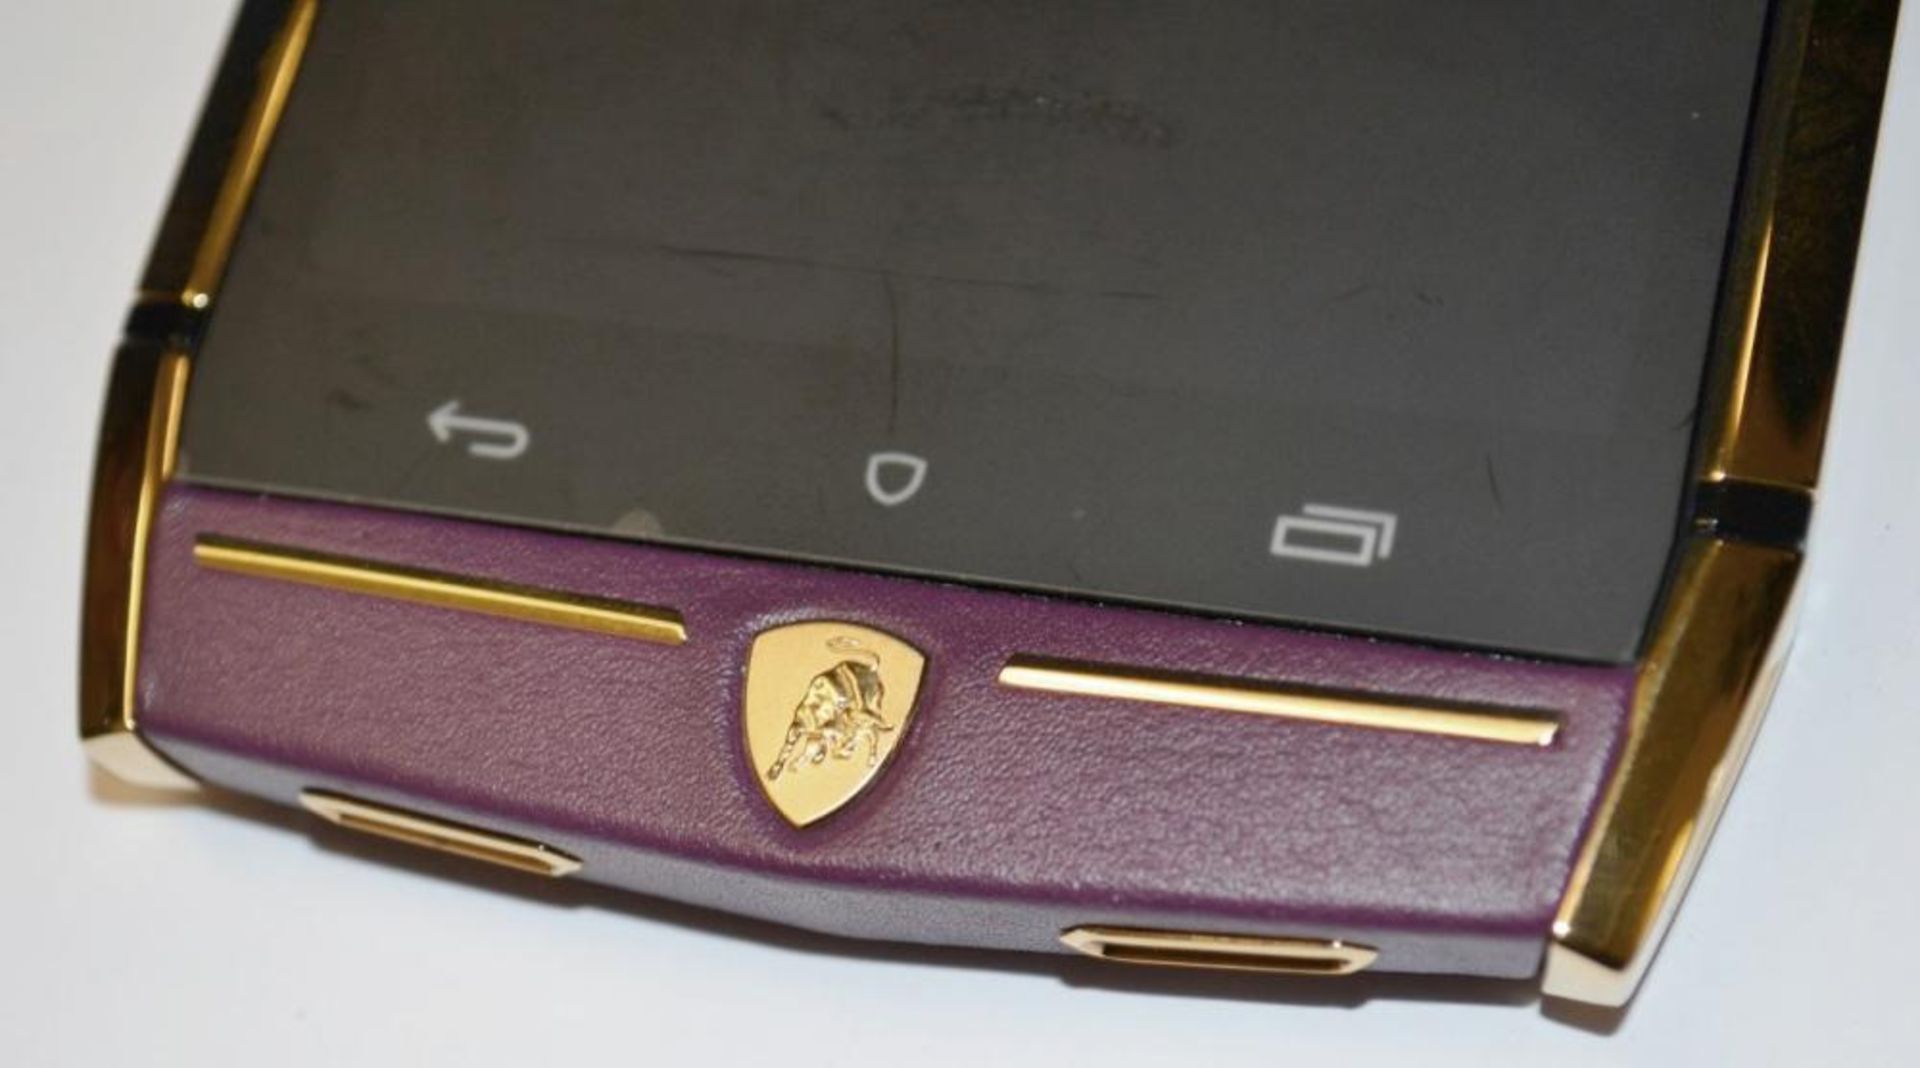 1 x Limited Edition Lamborghini "88 Tauri" Android Smart Phone - Art. 5522932 - Features Exquisite G - Image 6 of 18